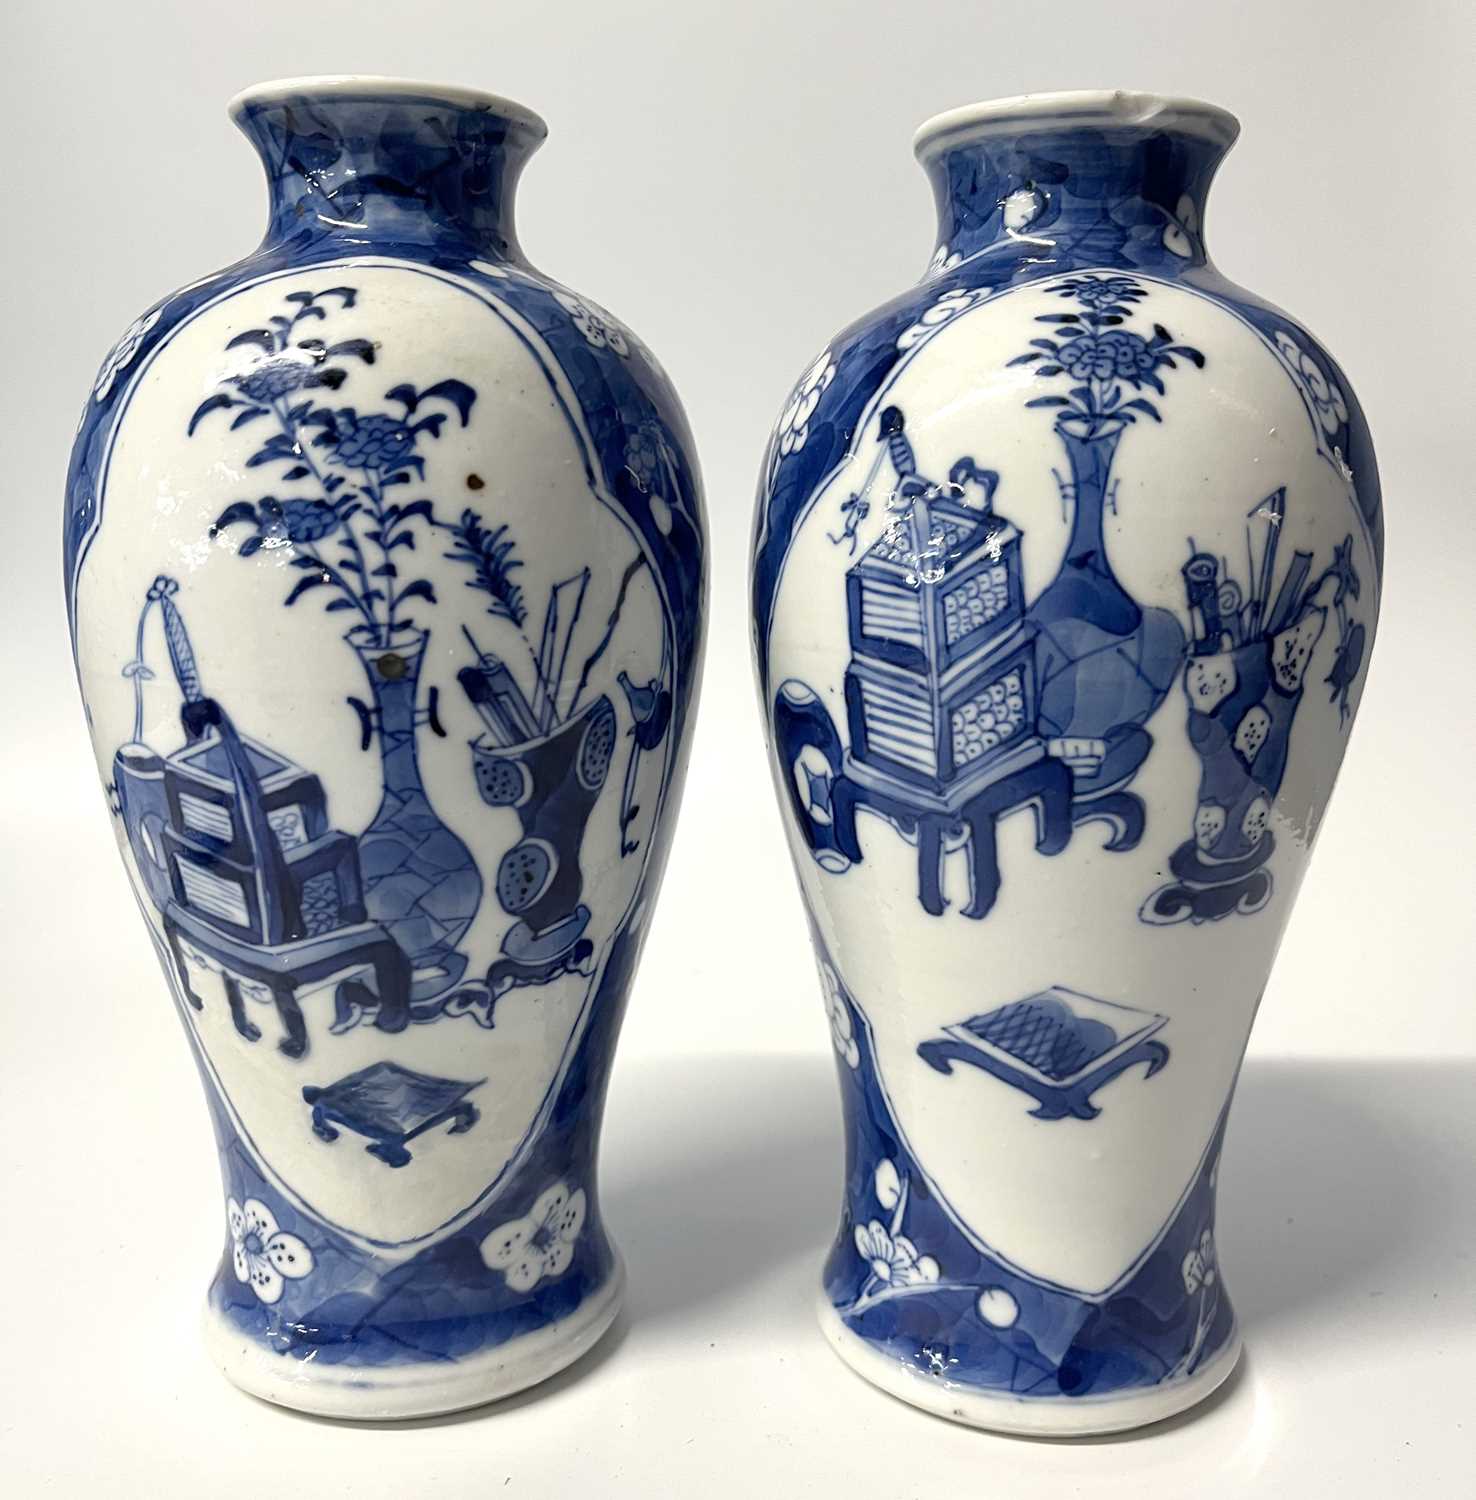 A pair of small Chinese porcelain vases in Qing Shi style with panels decorated with precious